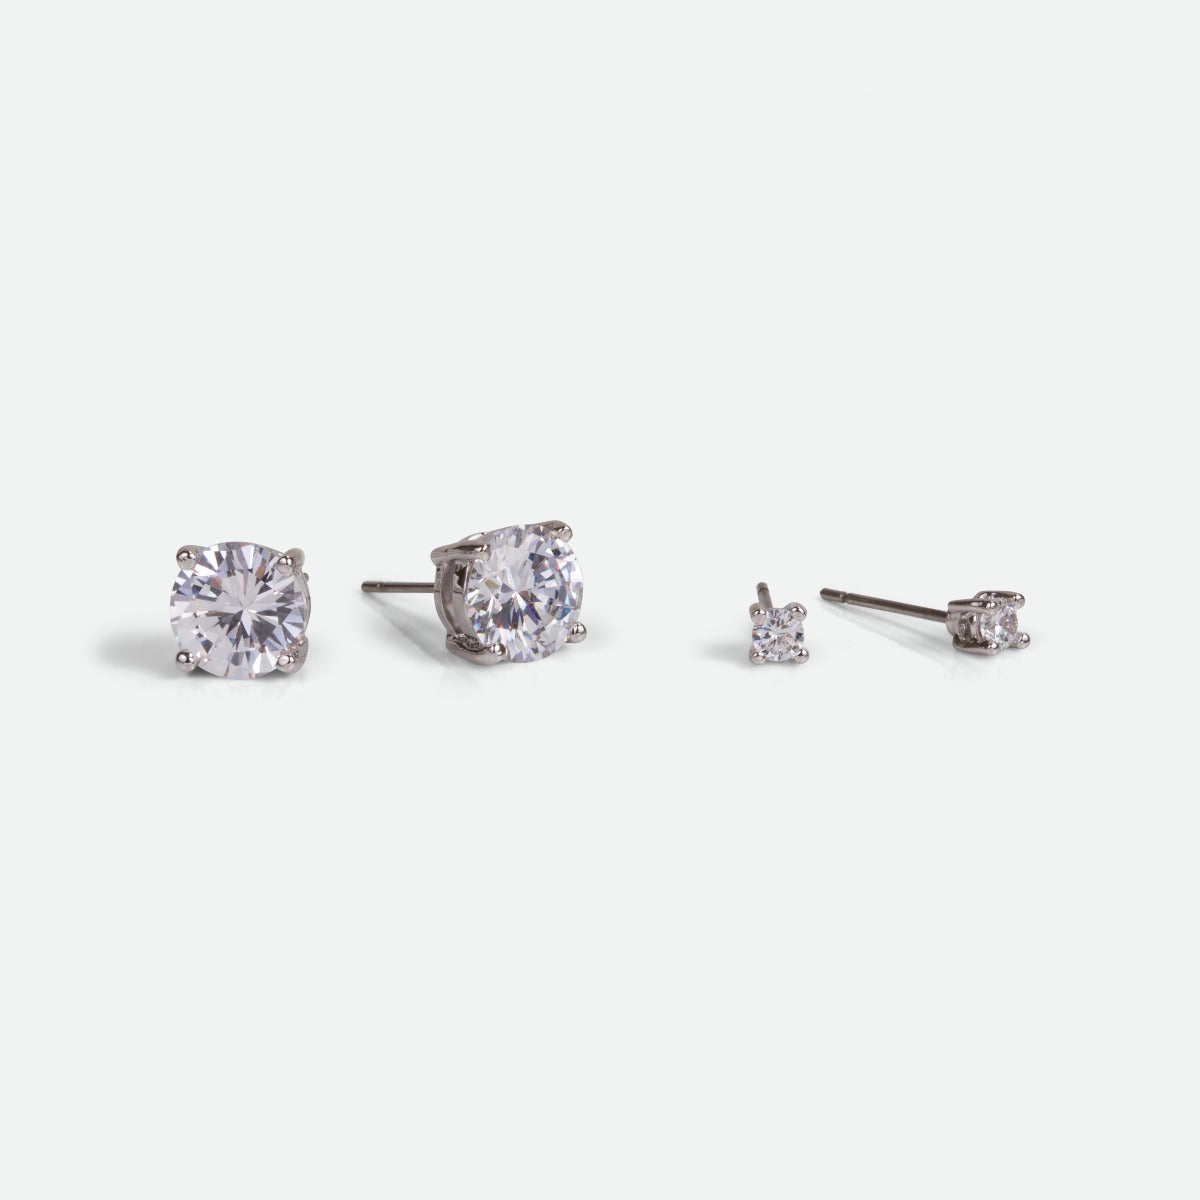 Duo of earrings with round cubic zirconia stones   